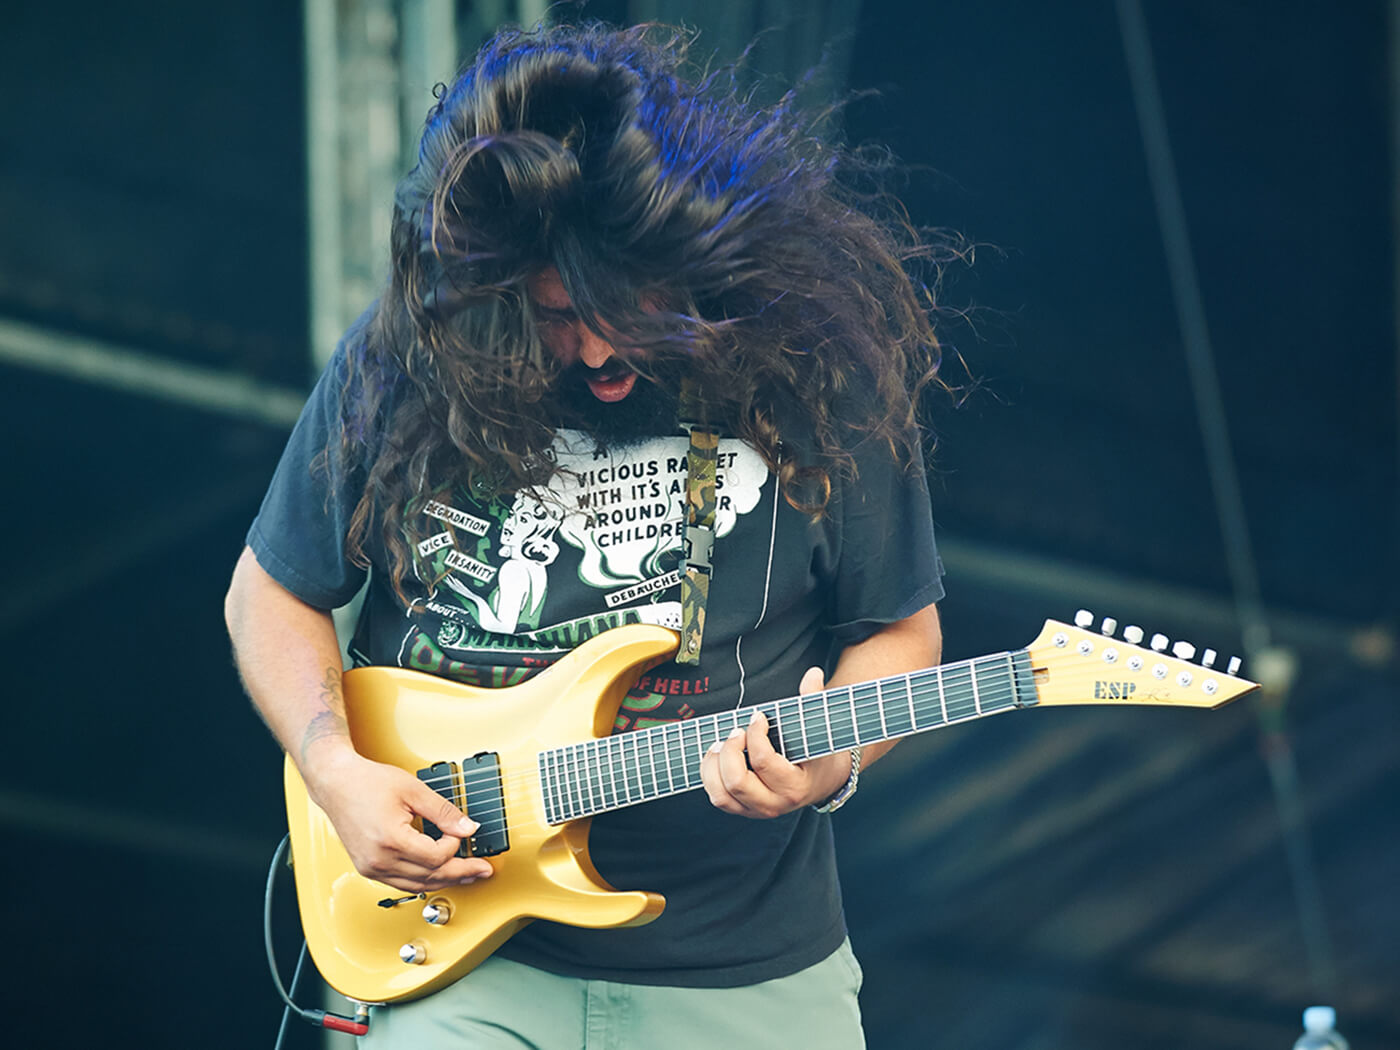 Stephen Carpenter of Deftones performing with an ESP guitar in 2014, photo by Gary Wolstenholme/Redferns via Getty Images